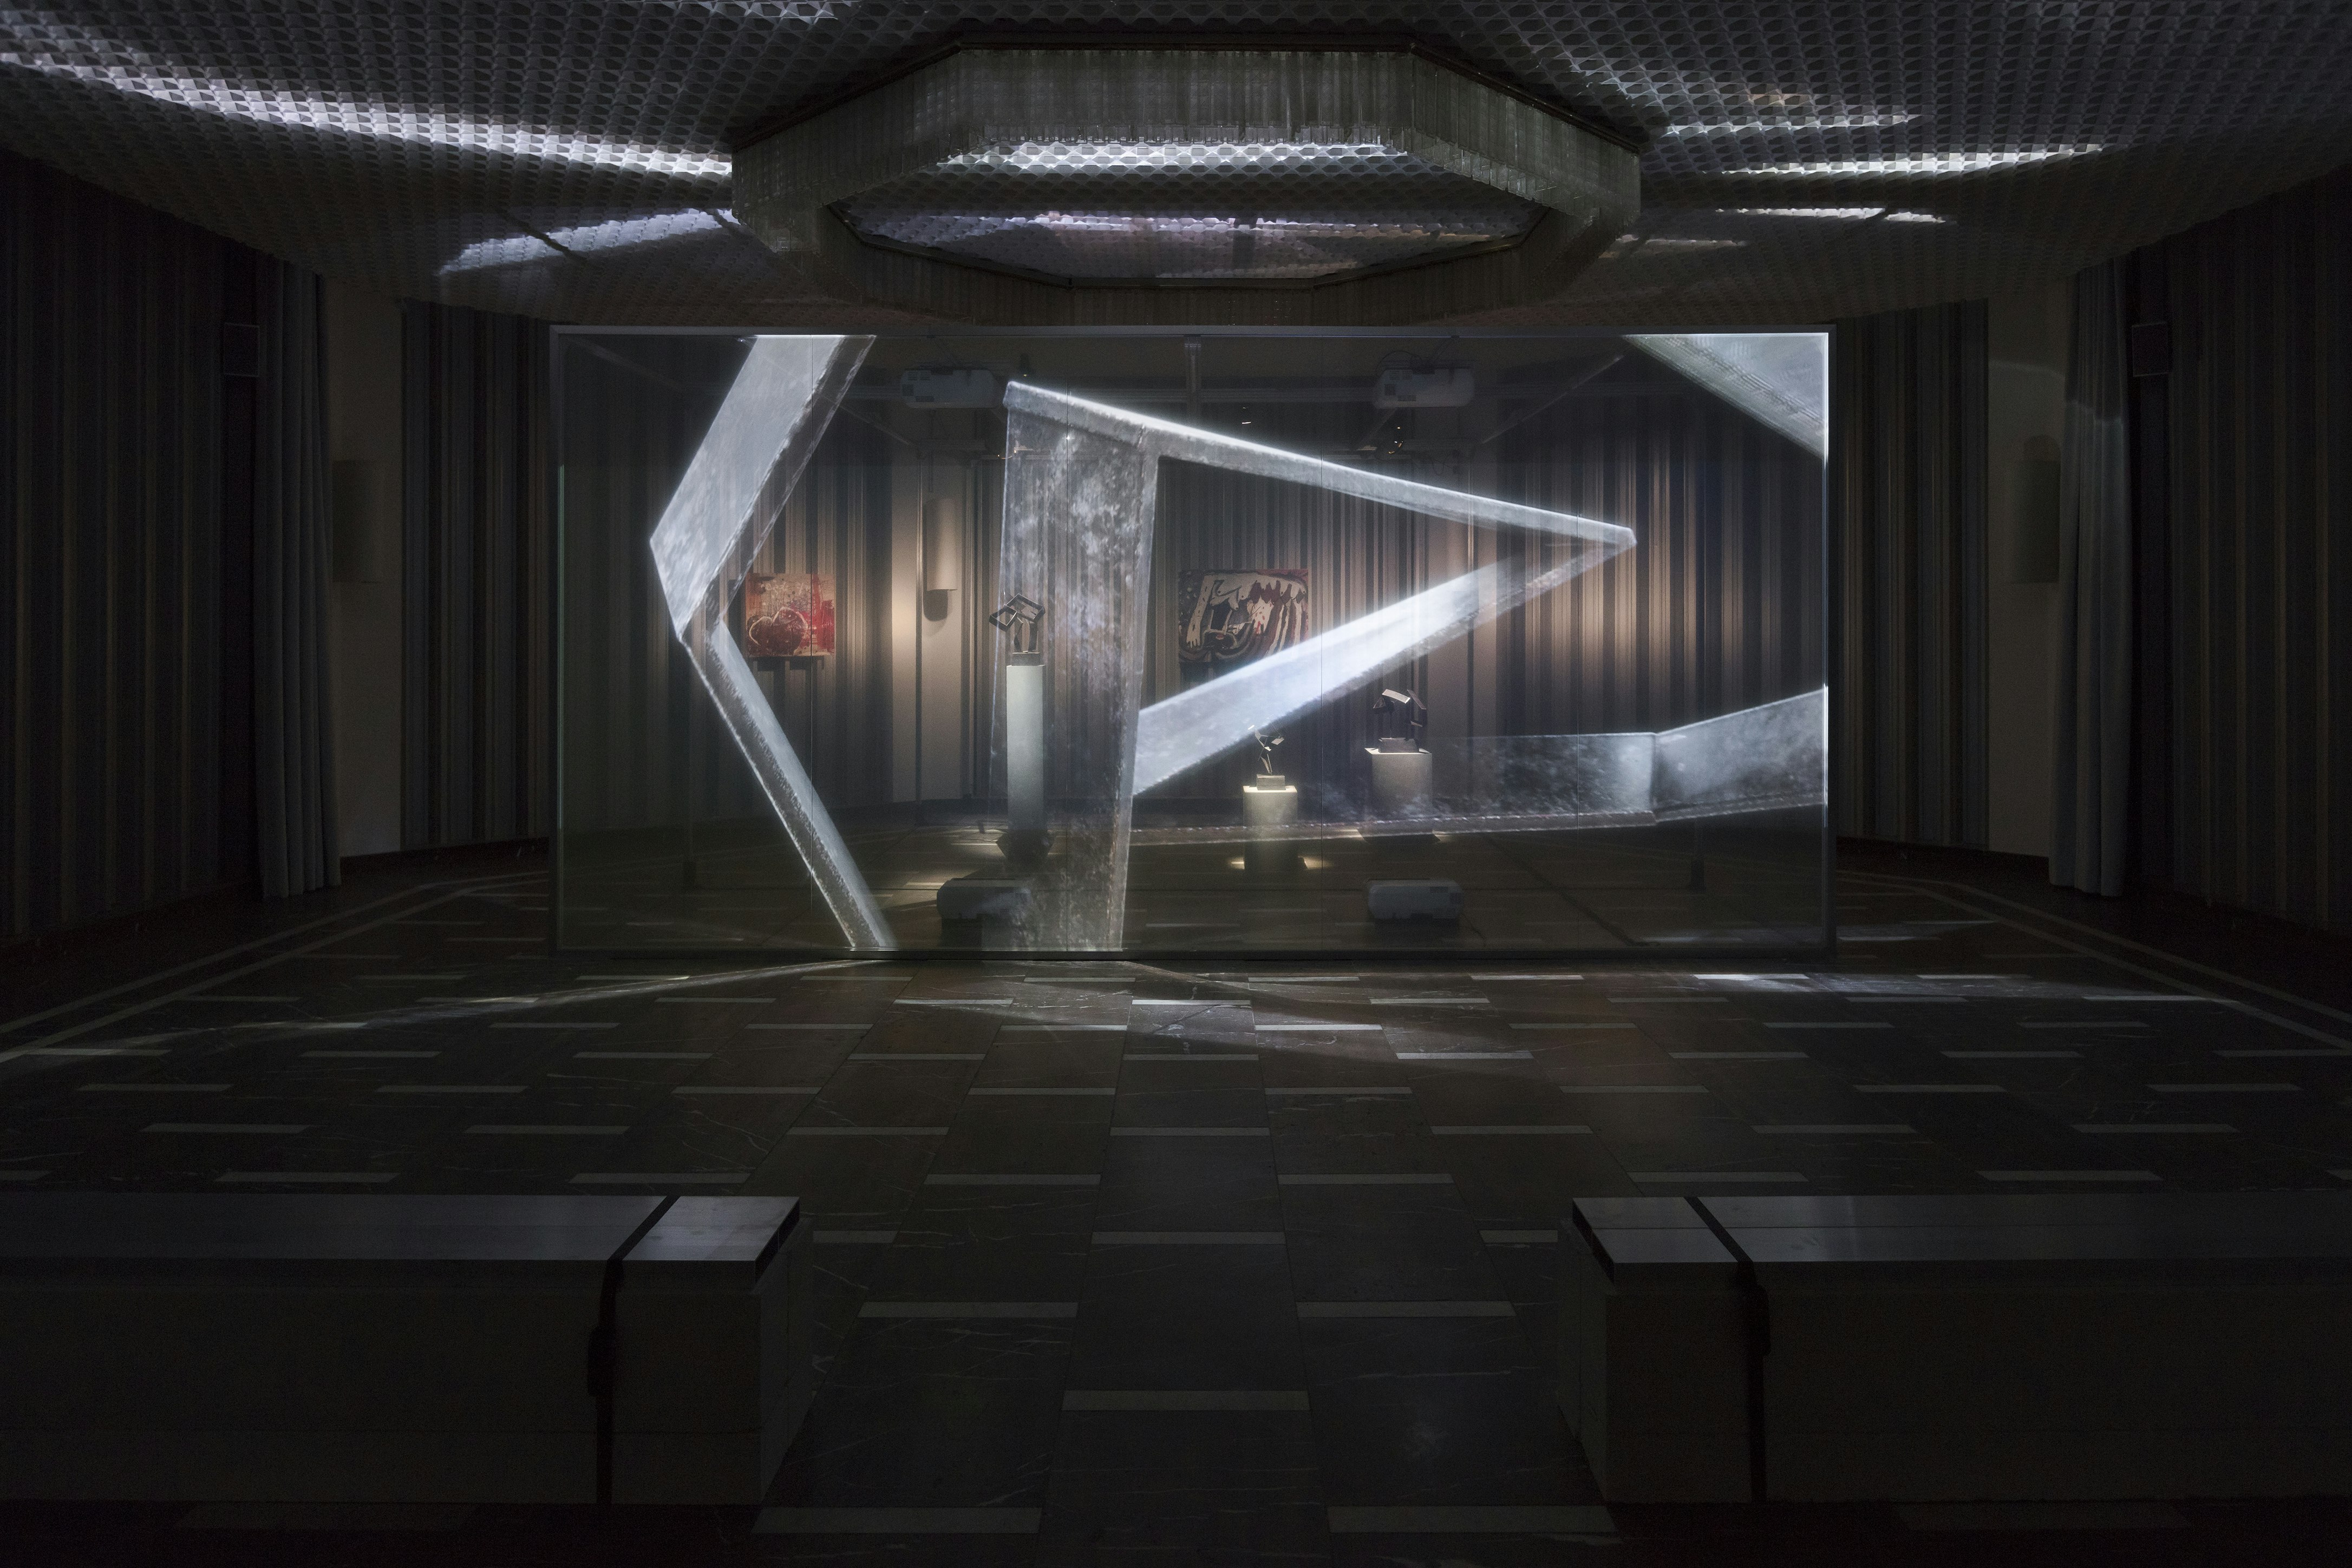  Christopher Kulendran Thomas in collaboration with Annika Kuhlmann, Being Human (installation view), 2019, digital projection on acrylic. Presented in Ground Zero, Schinkel Pavillon, Berlin, 11 September – 15 December 2019. Photo: Delfino Sisto Legnani and Marco Cappelletti. Commissioned by V–A–C Foundation. Courtesy Schinkel Pavillon.